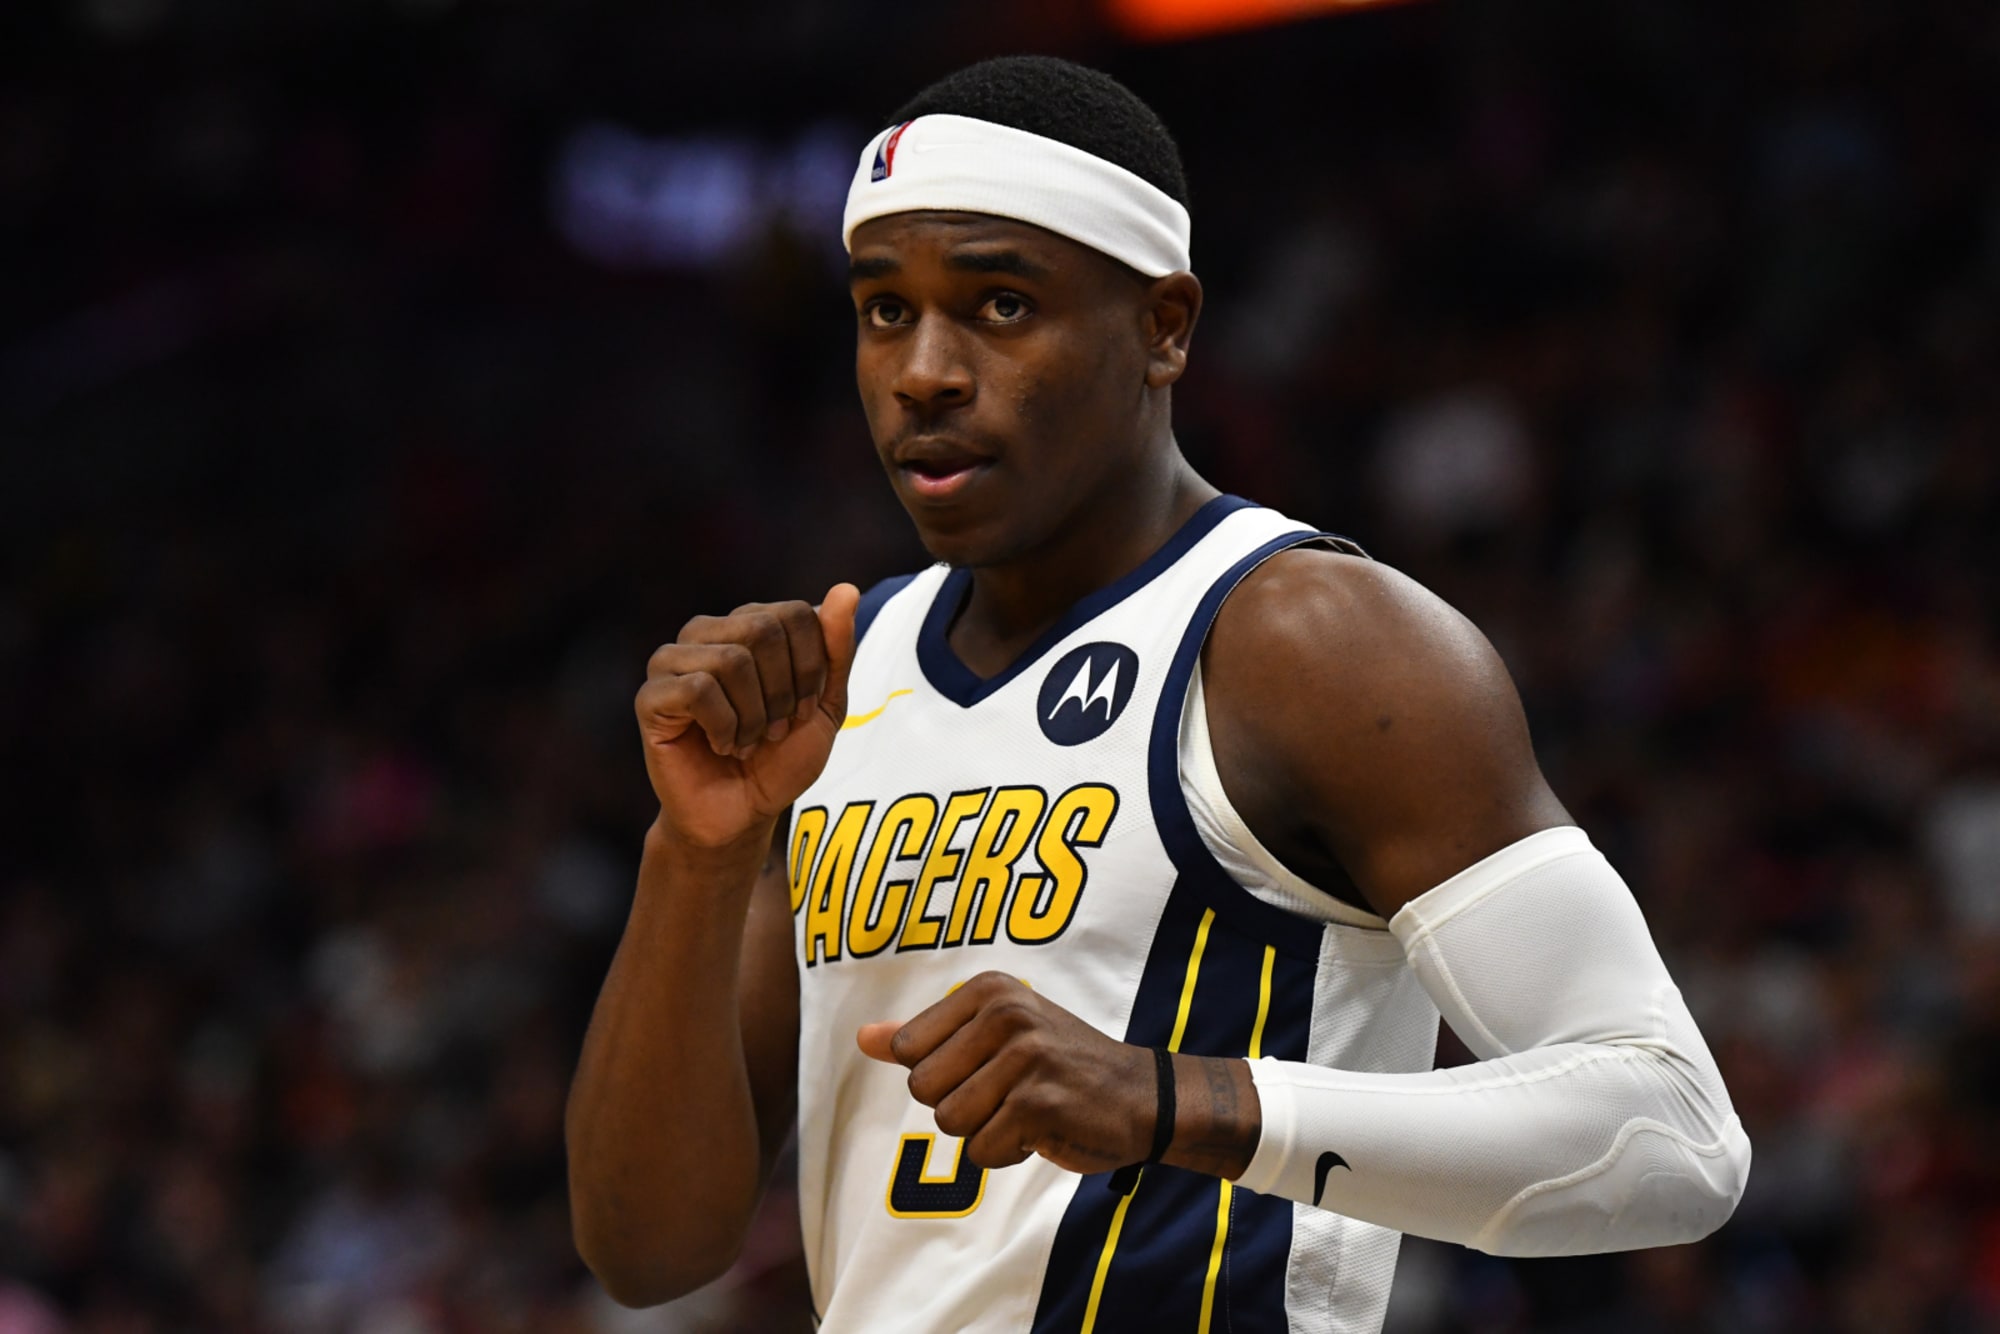 Aaron Holiday may be a hidden gem for 